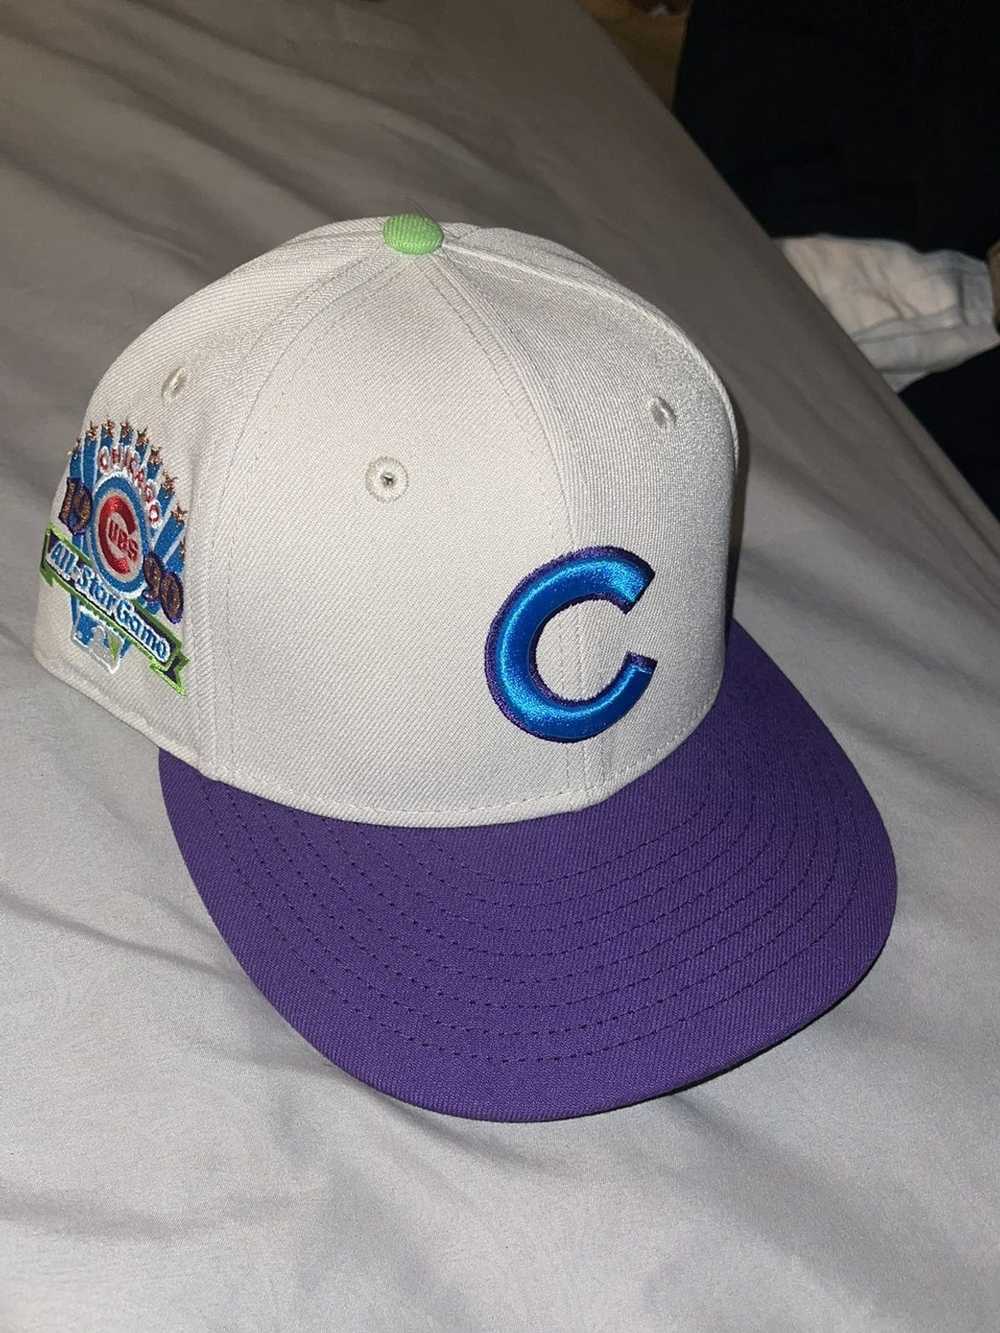 Not) Hatclub Chicago Cubs Infrared UV Fitted Hat 7 1/8 for Sale in